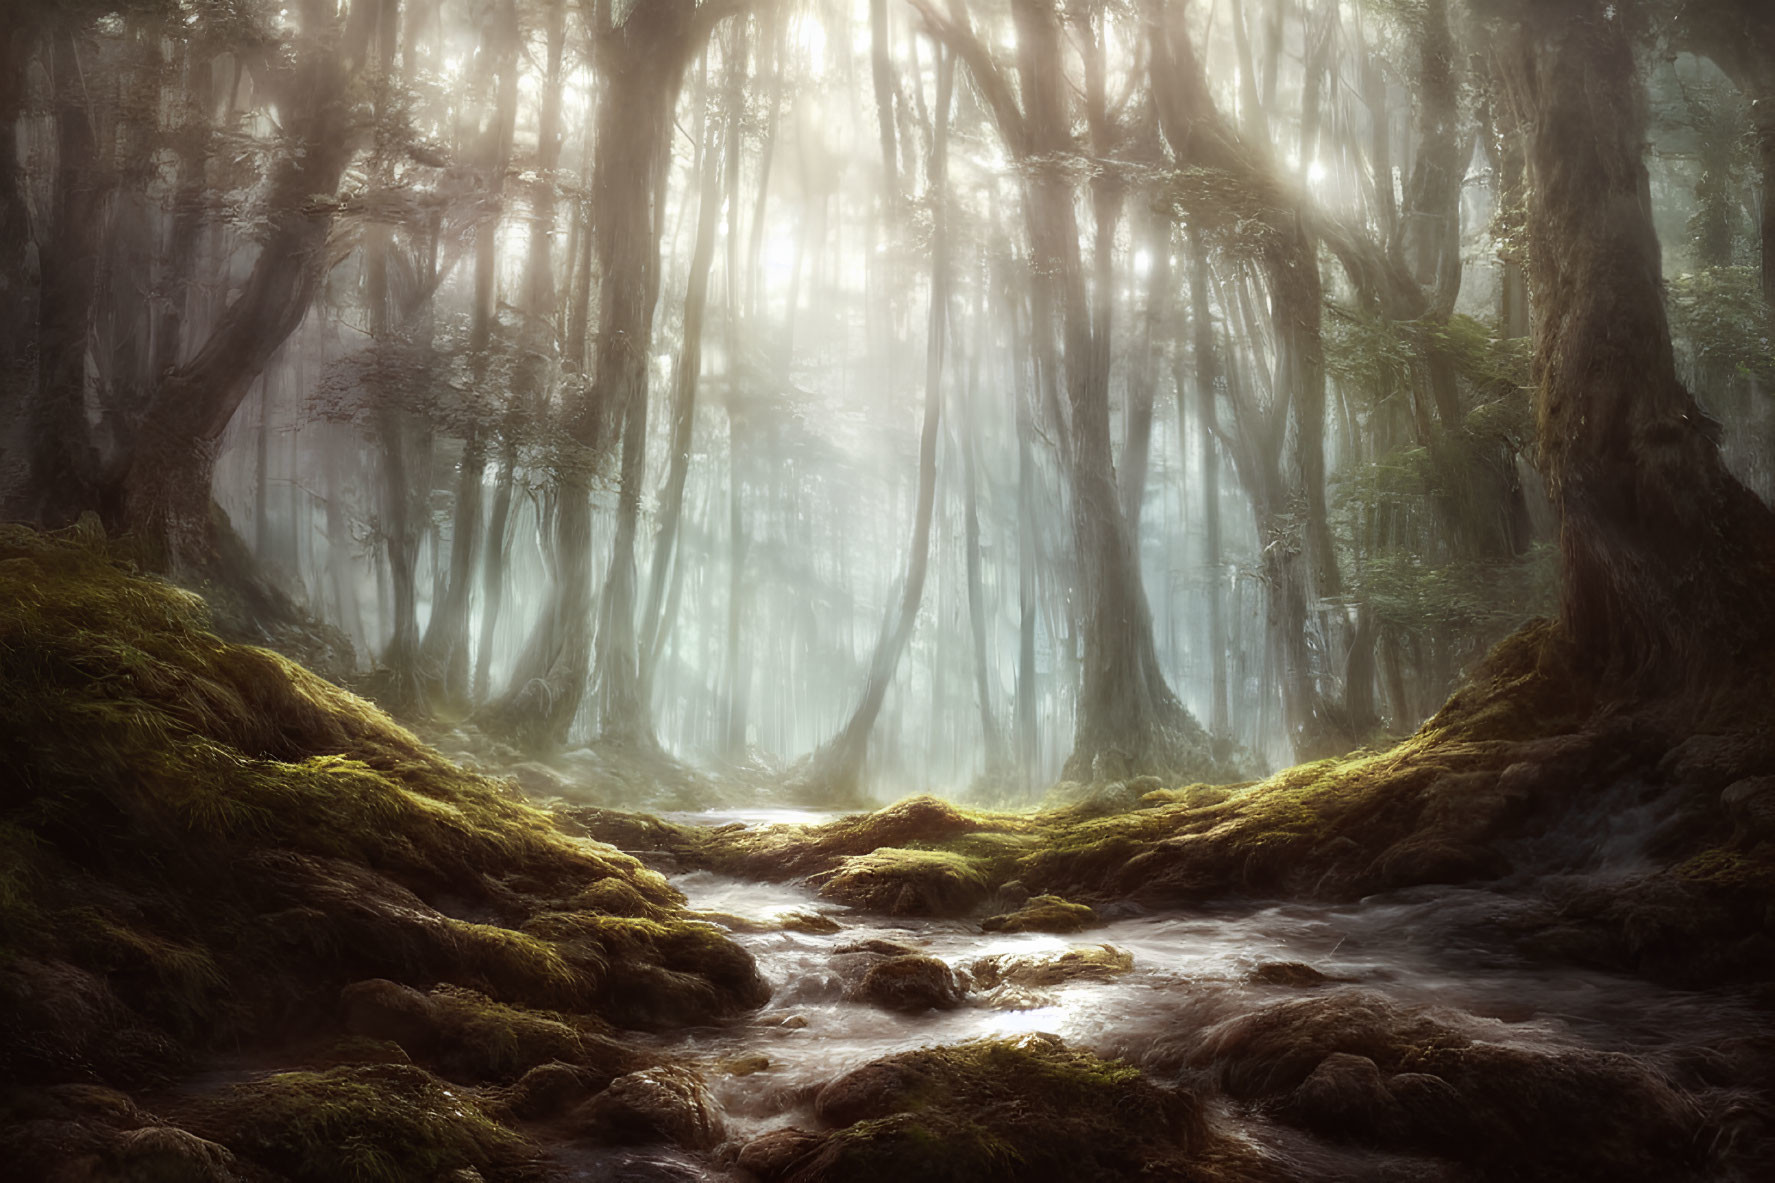 Misty Mossy Forest with Sunlight and Stream